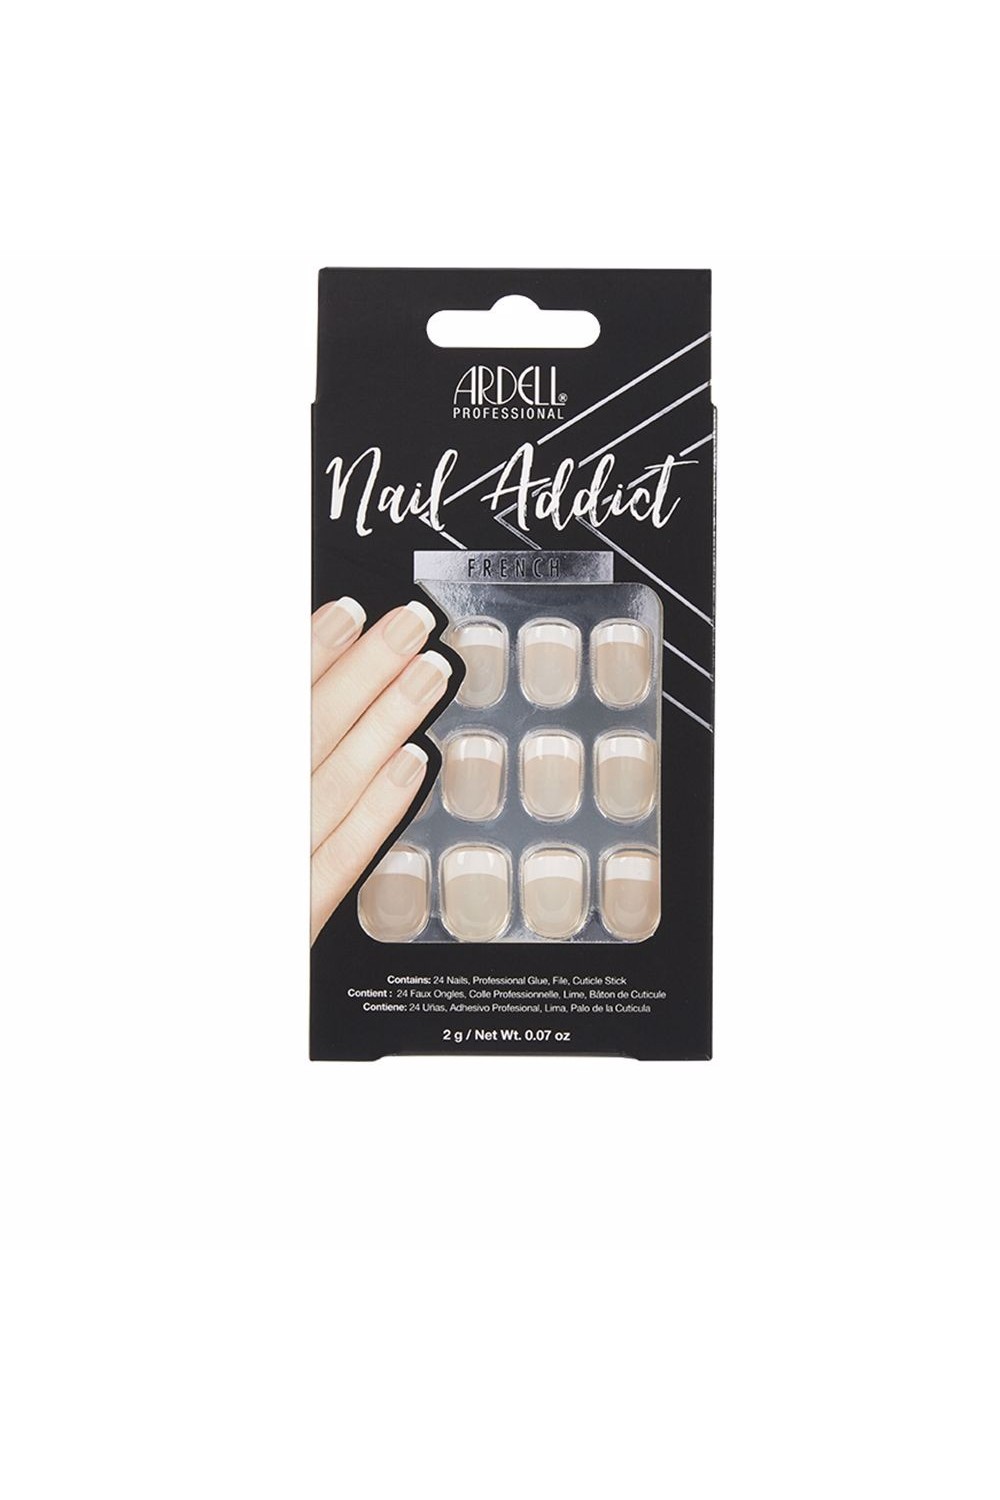 Ardell Nail Addict Classic French False Nails